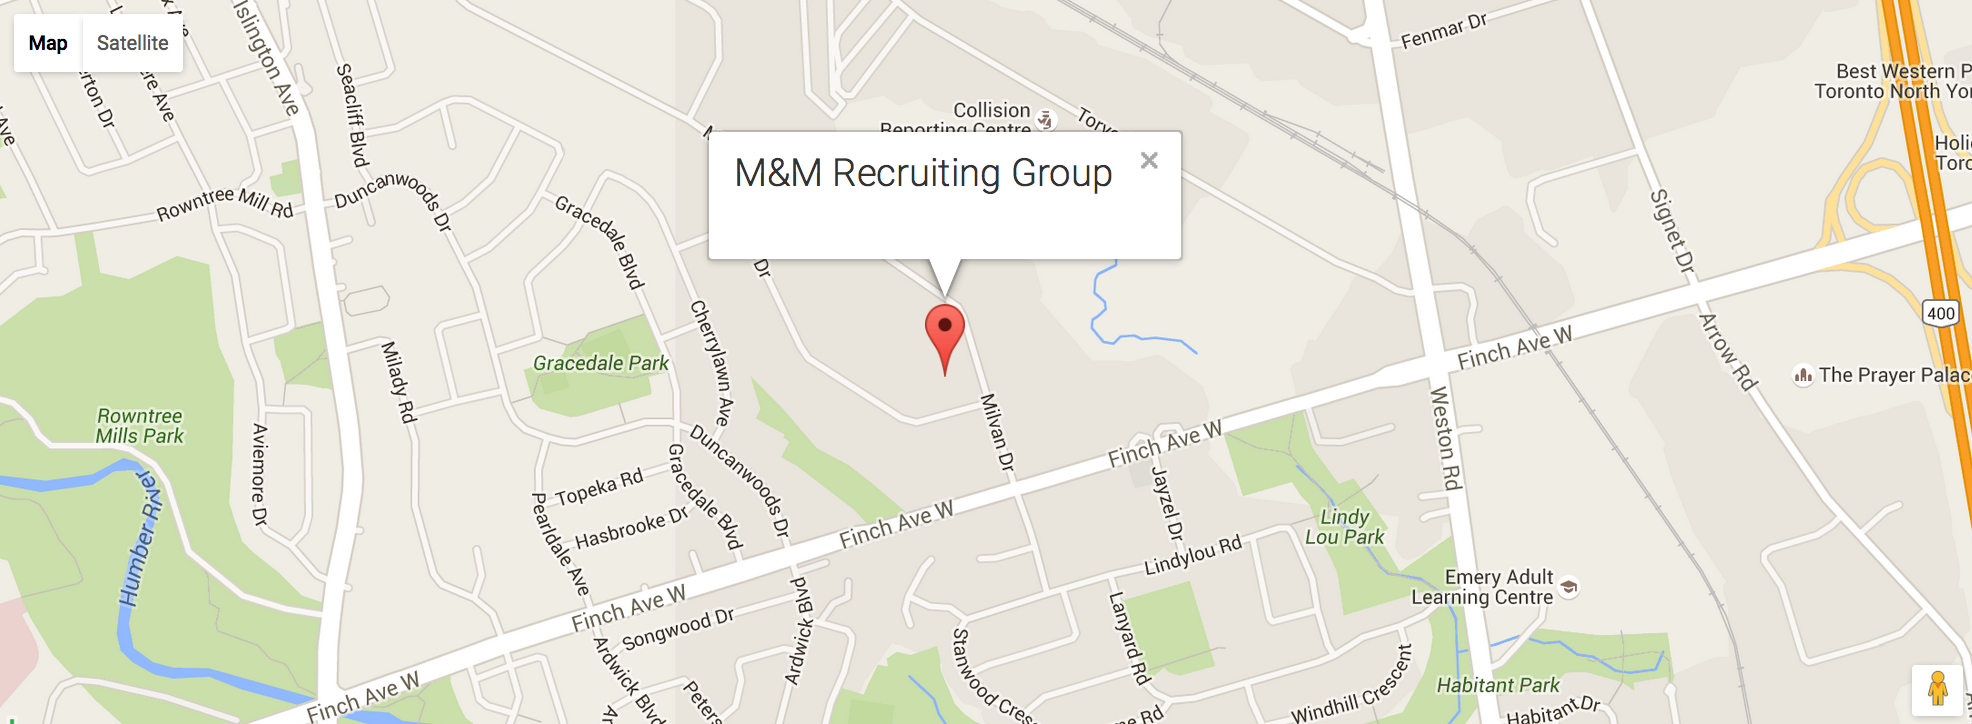 M&M Recruiting Group map